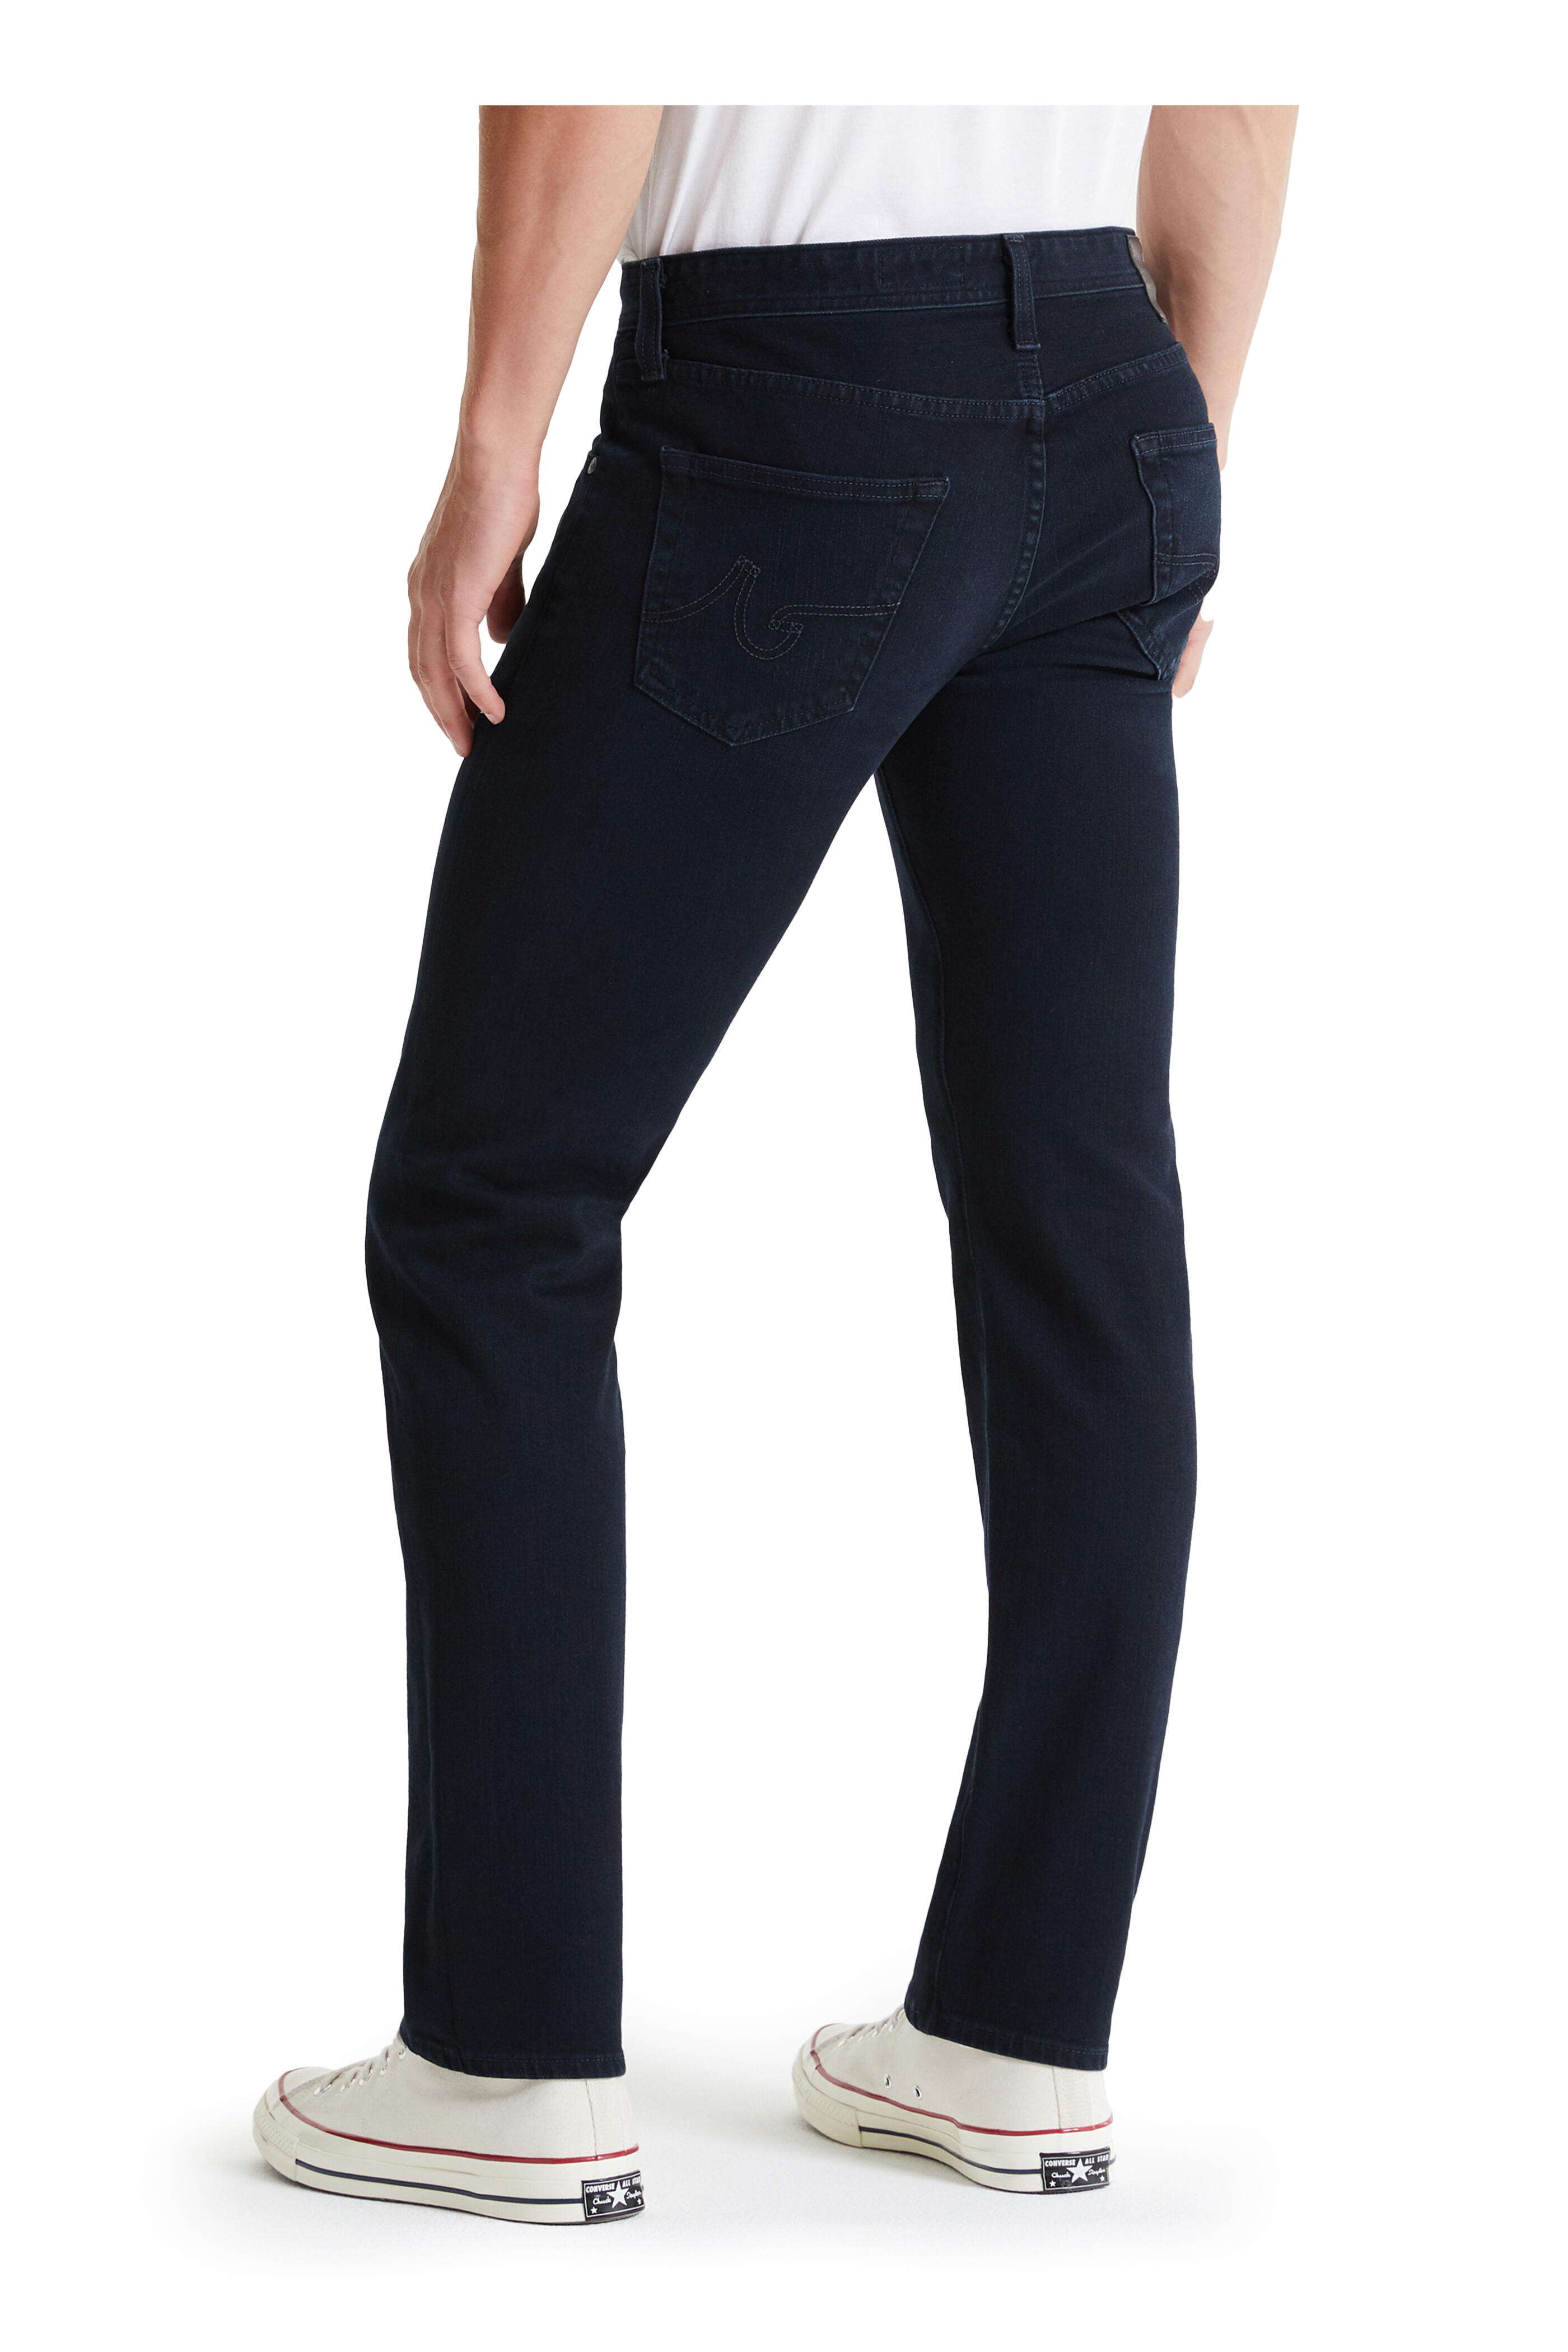 AG - The Graduate Bundled Tailored Leg Jean | Mitchell Stores